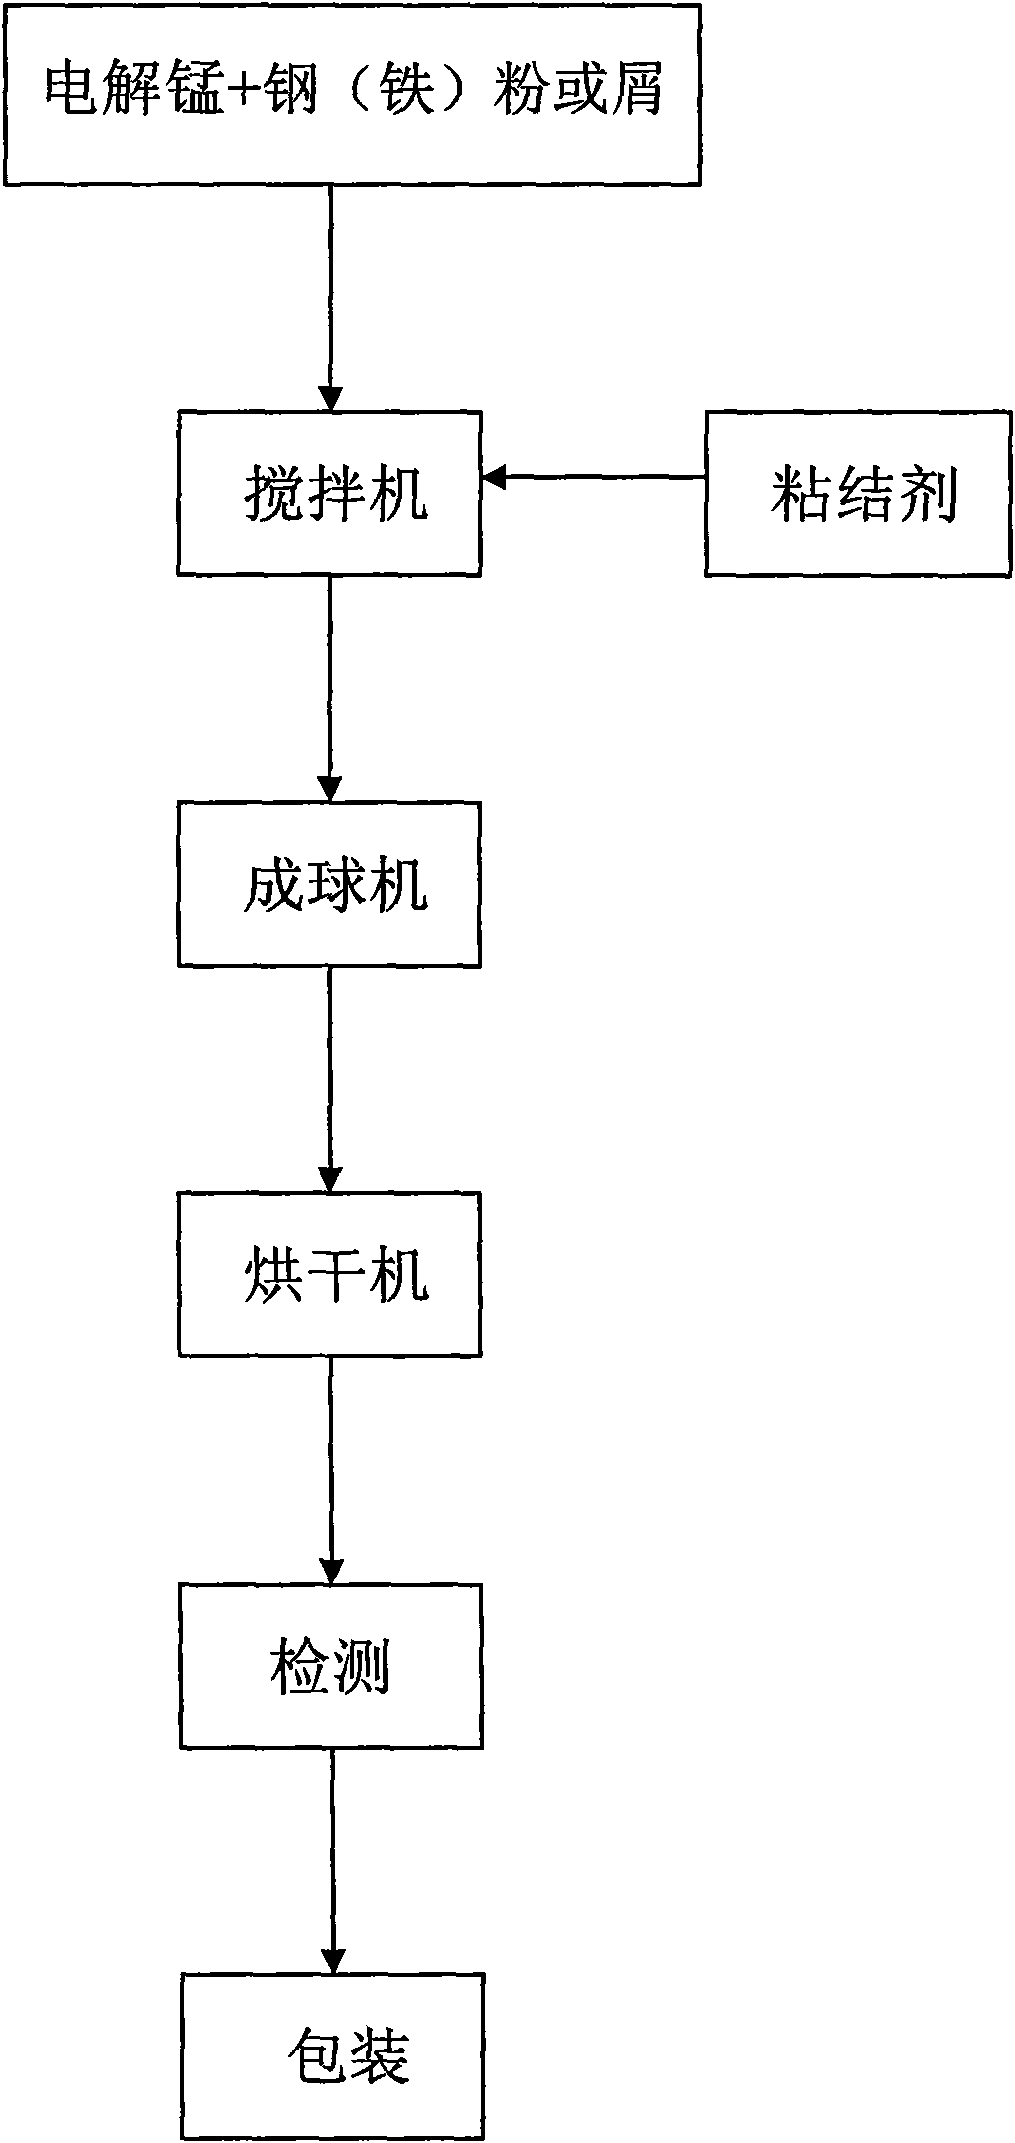 Method for producing manganese alloy